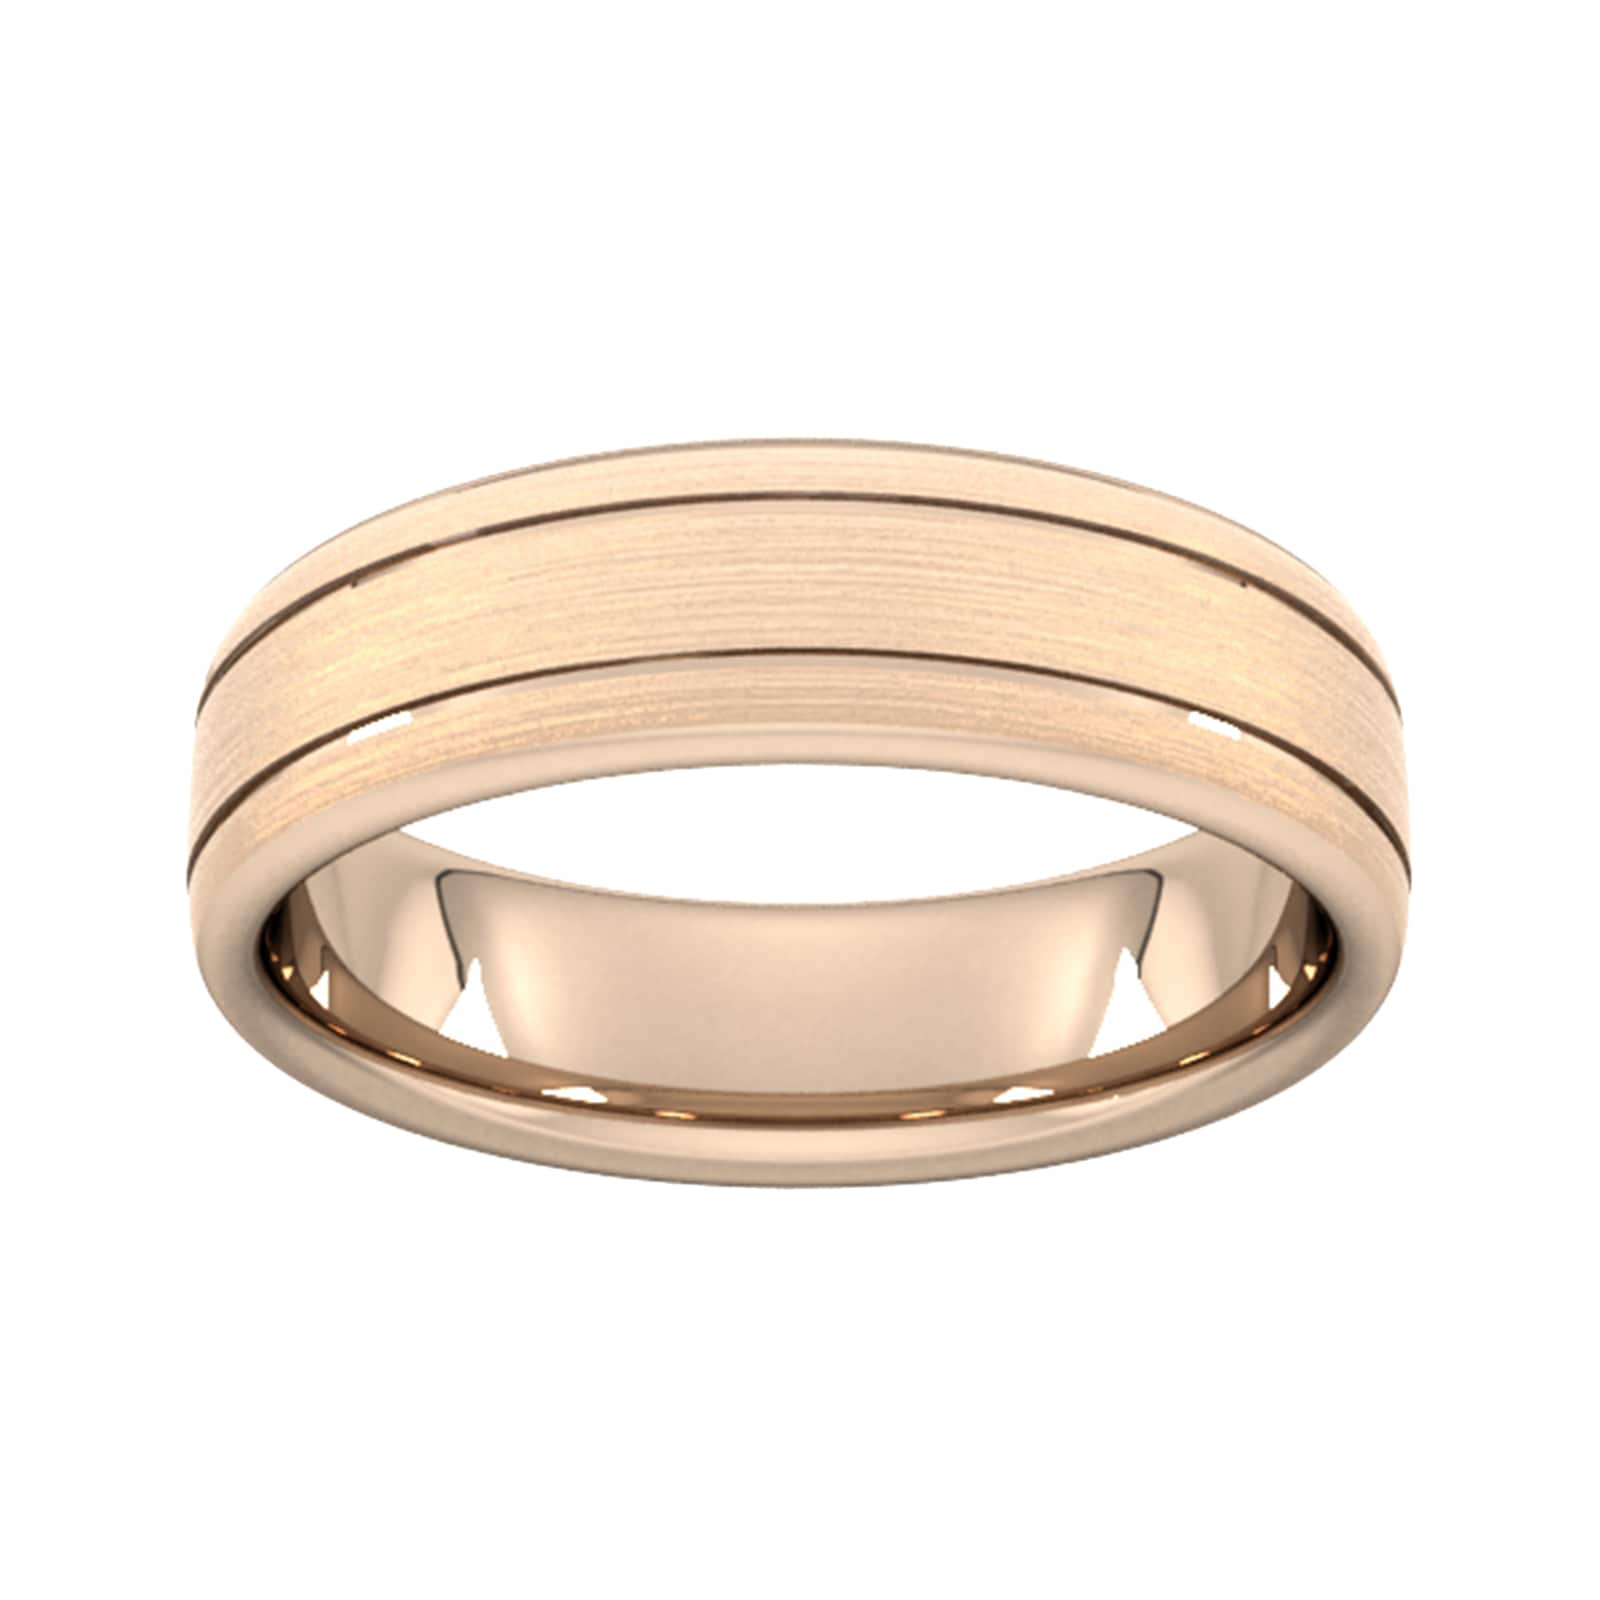 6mm Traditional Court Standard Matt Finish With Double Grooves Wedding Ring In 18 Carat Rose Gold - Ring Size J